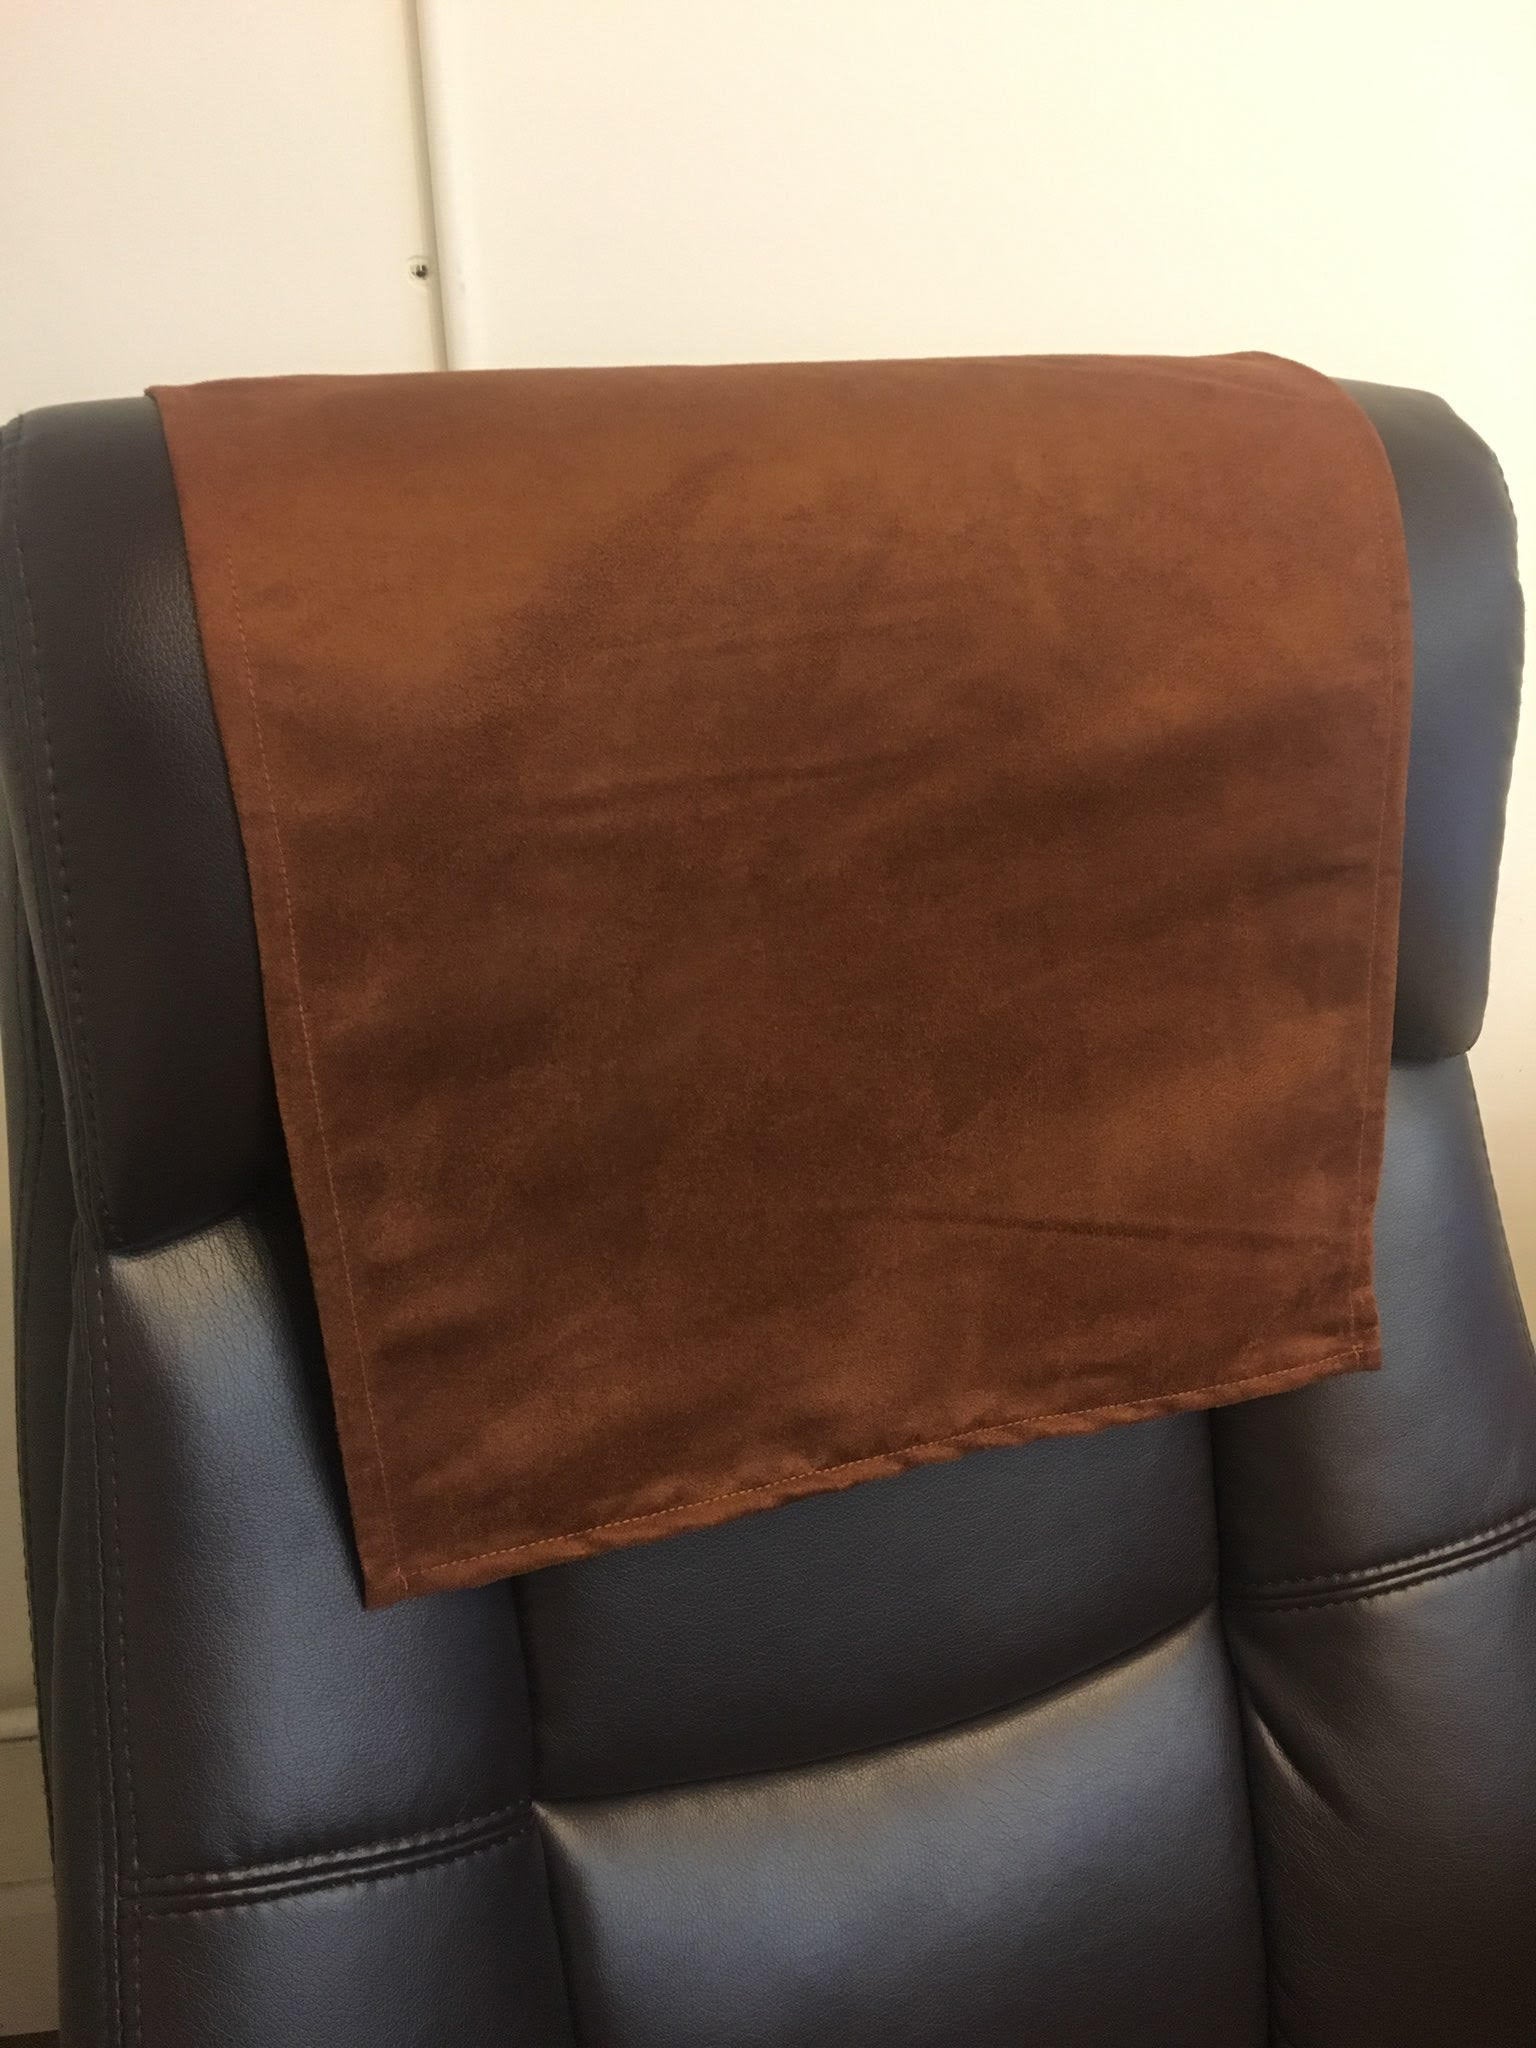 2 Pieces - 14 BY 24 INCHES - leather Brown faux suede with DARK Brown pvc vinyl backing                                         Dark Brown Faux Suede 14”x24" Recliner Furniture Protector Cover || Home Décor